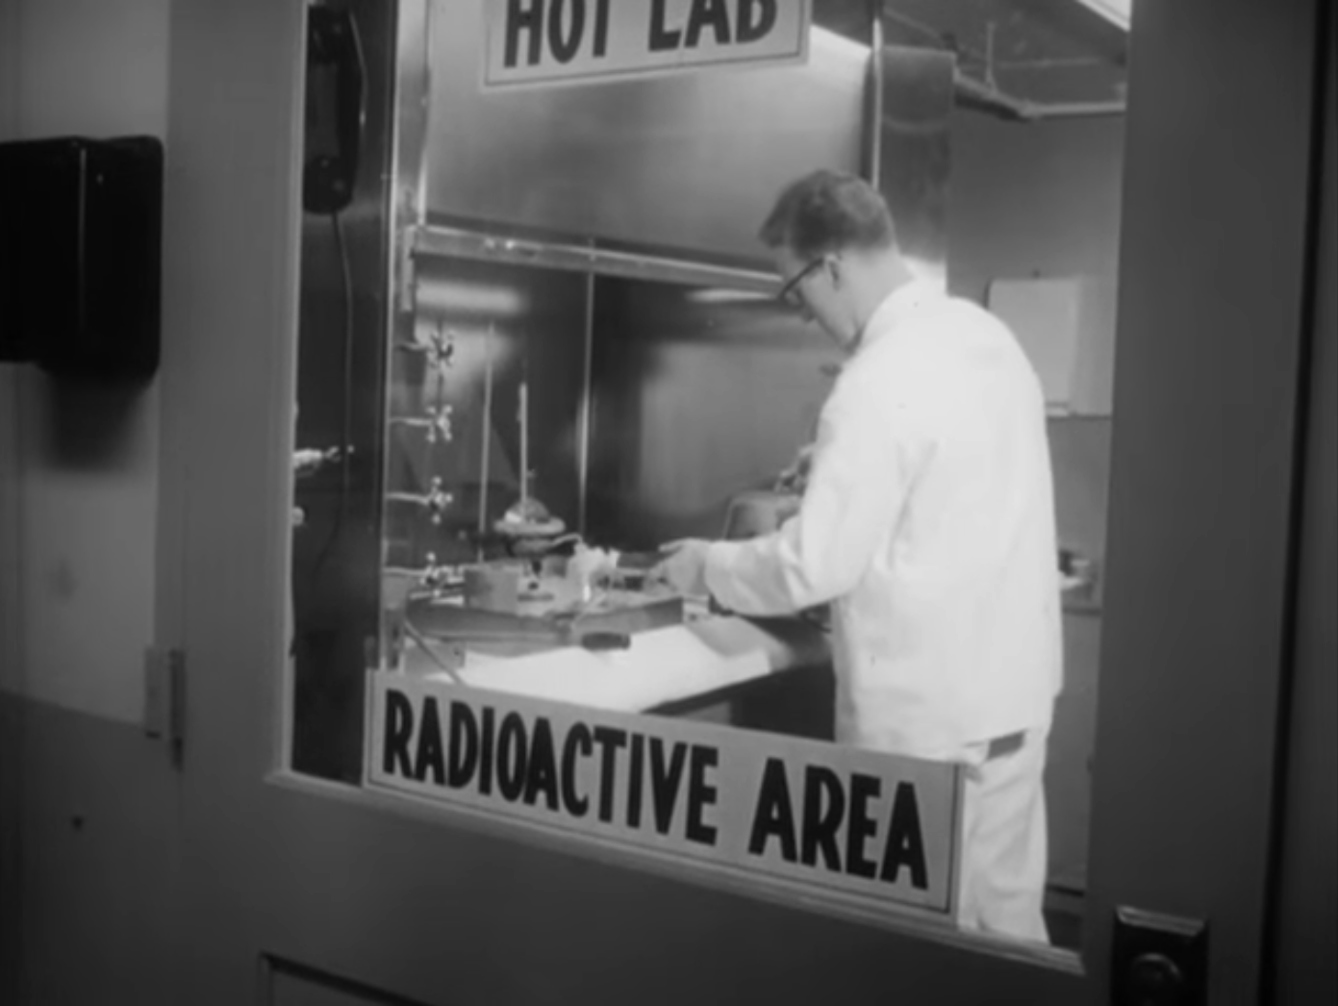 Still from black and white film featuring a doctor wearing a lab coat working. He is framed by the window of a door which has a label on it saying 'Hot lab', 'Radioactive Area'